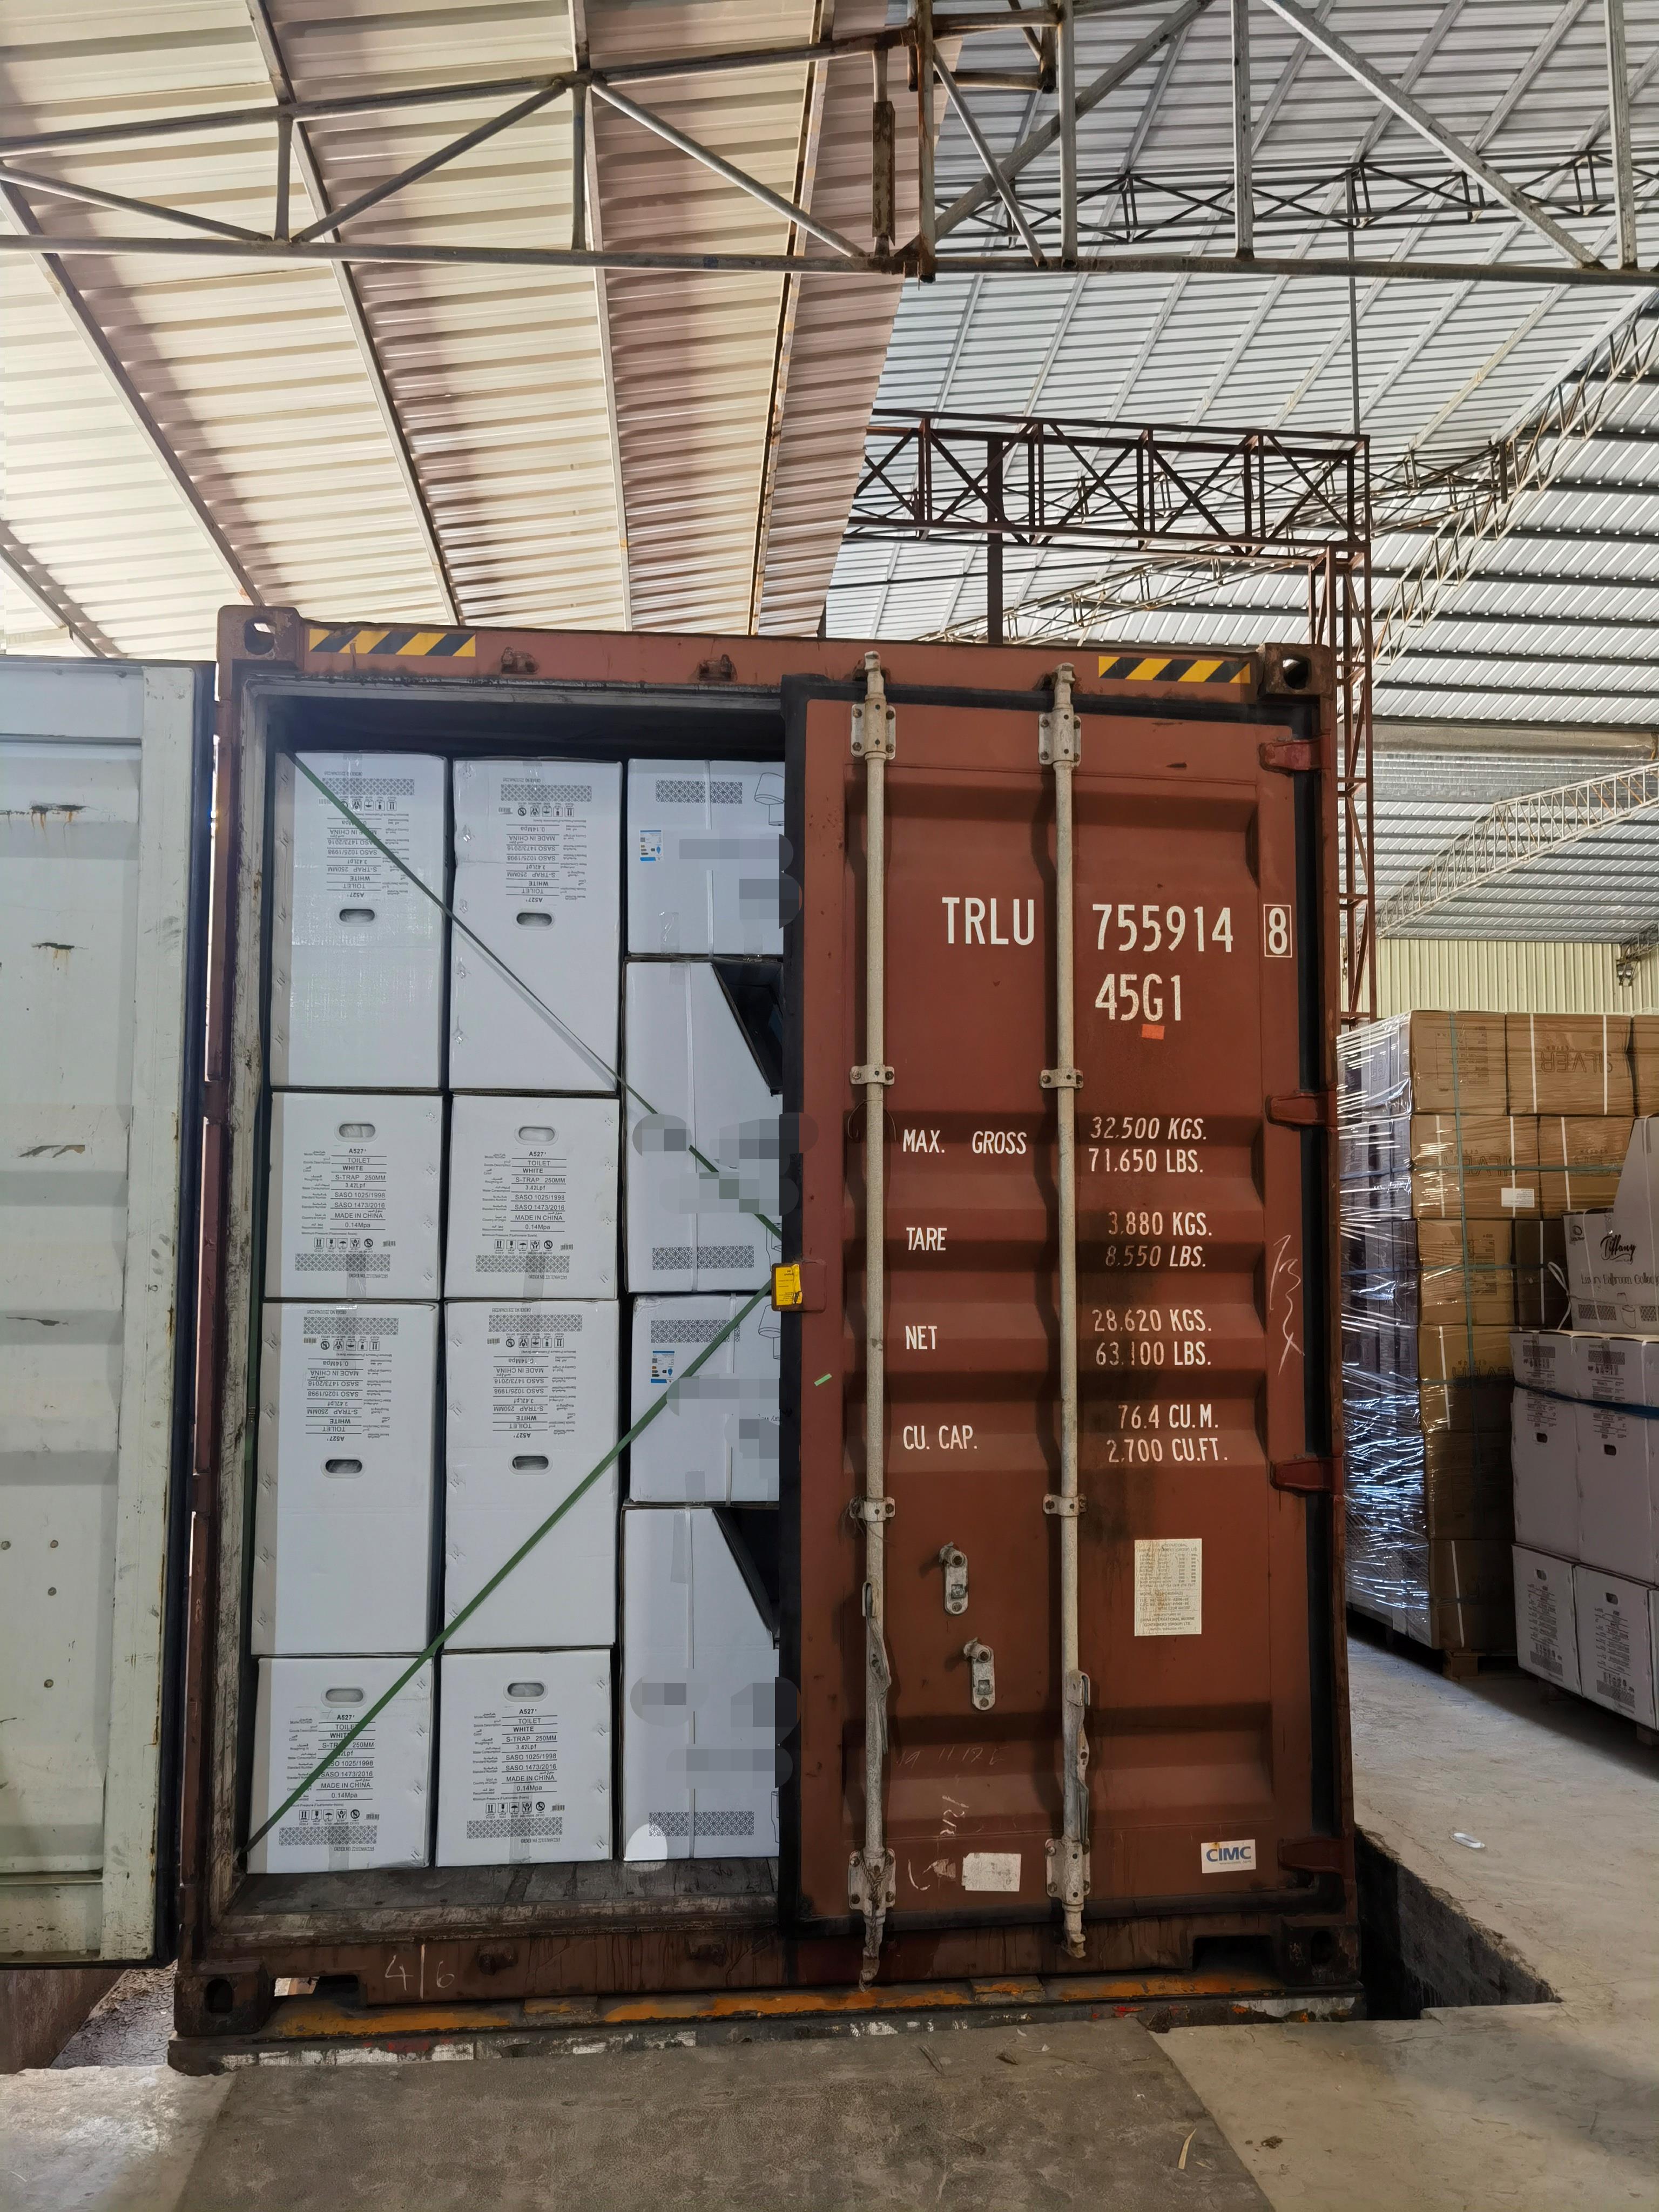 Fabia Containers Loading For Ceramic Toilets